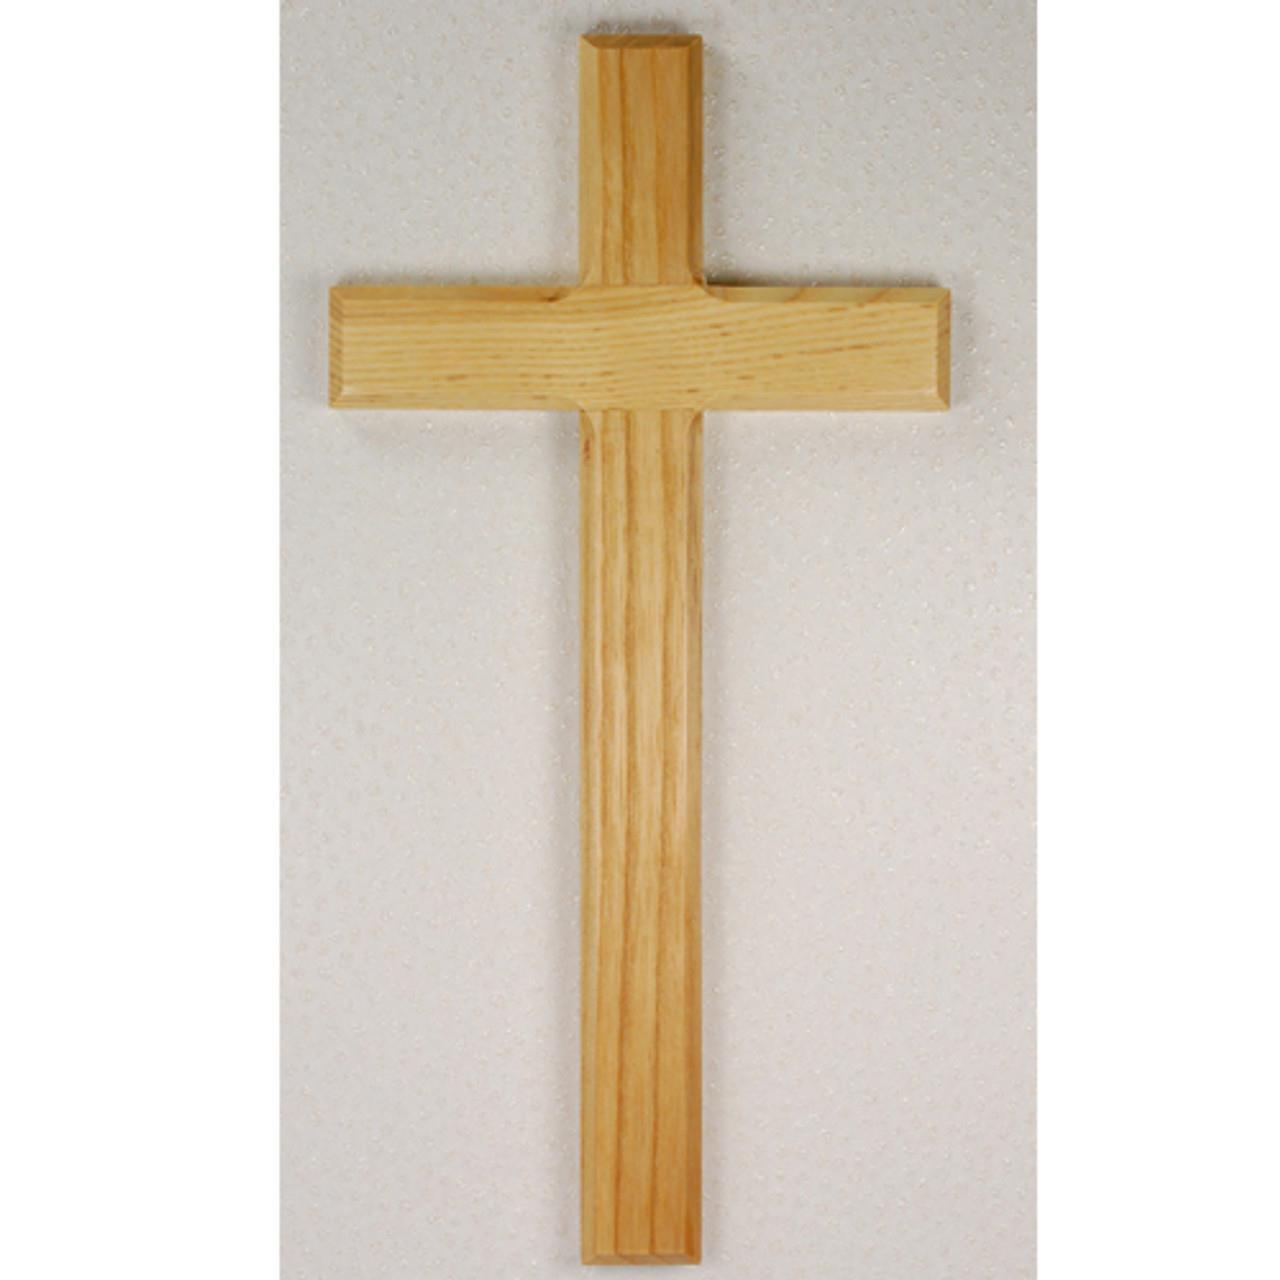 Oak Cross Handcrafted from high quality Oak Size 10in Comes Boxed